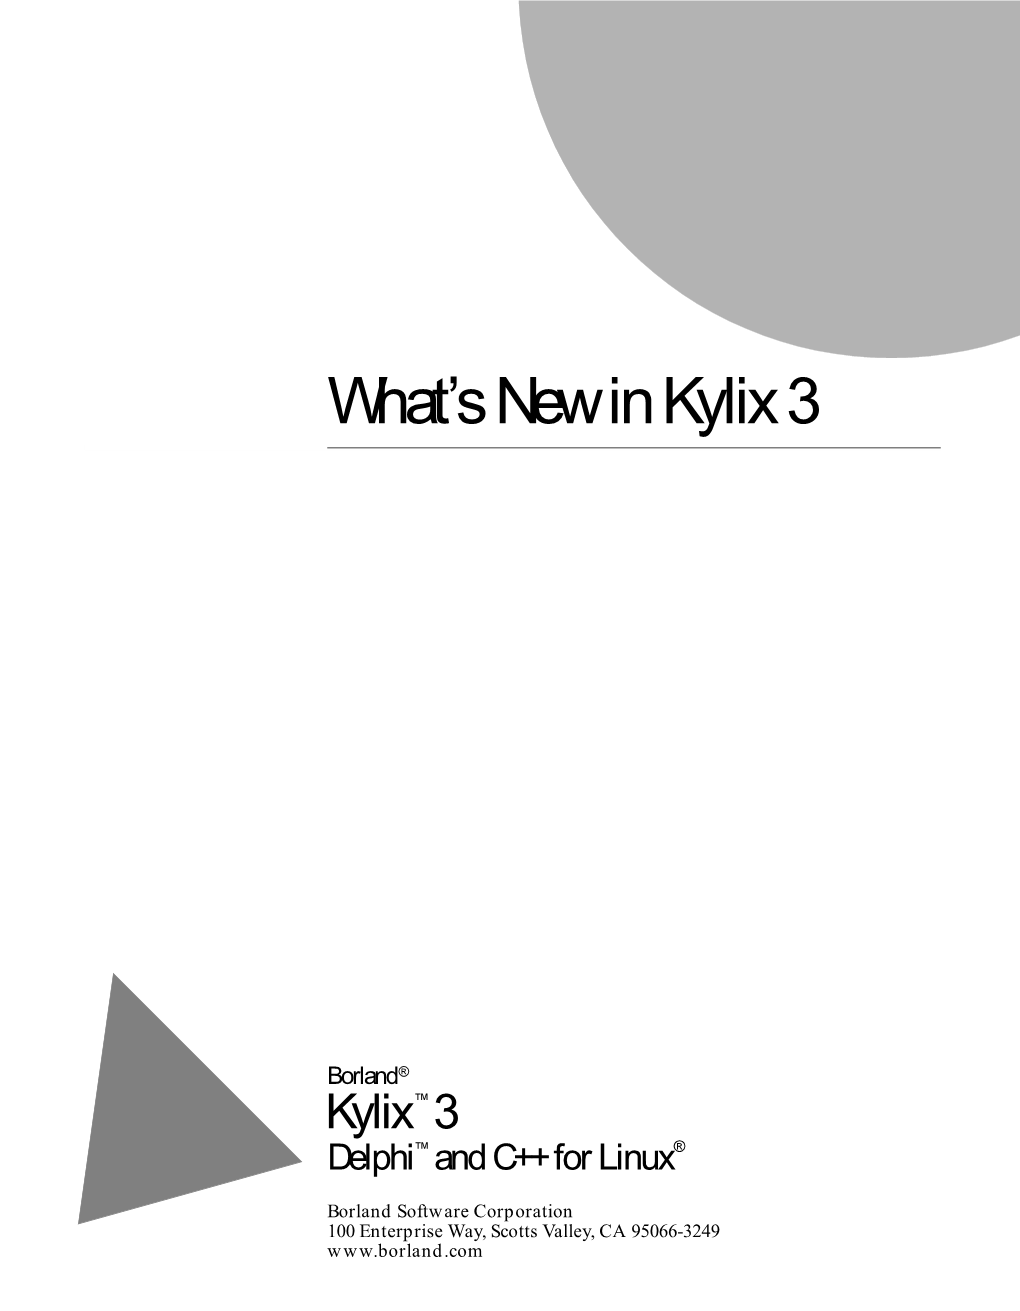 What's New in Kylix 3